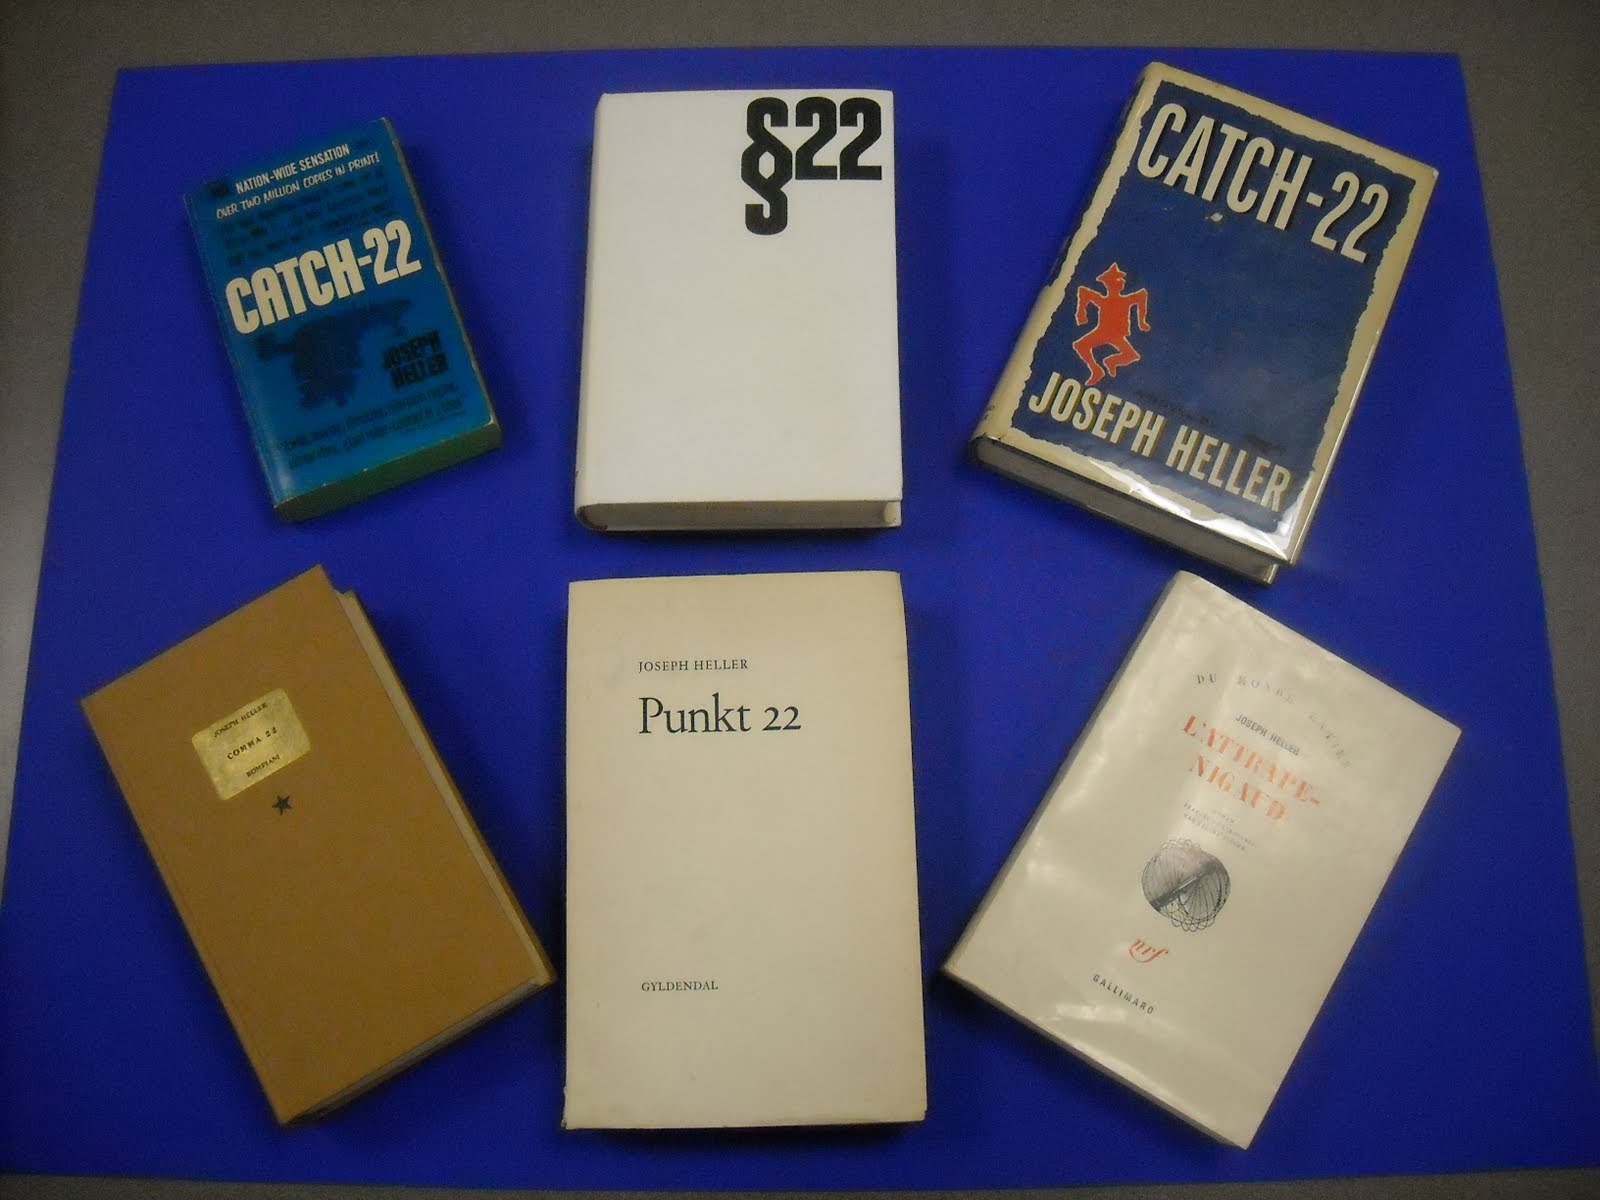 Photograph of different book cover editions for Catch-22 by Joseph Heller